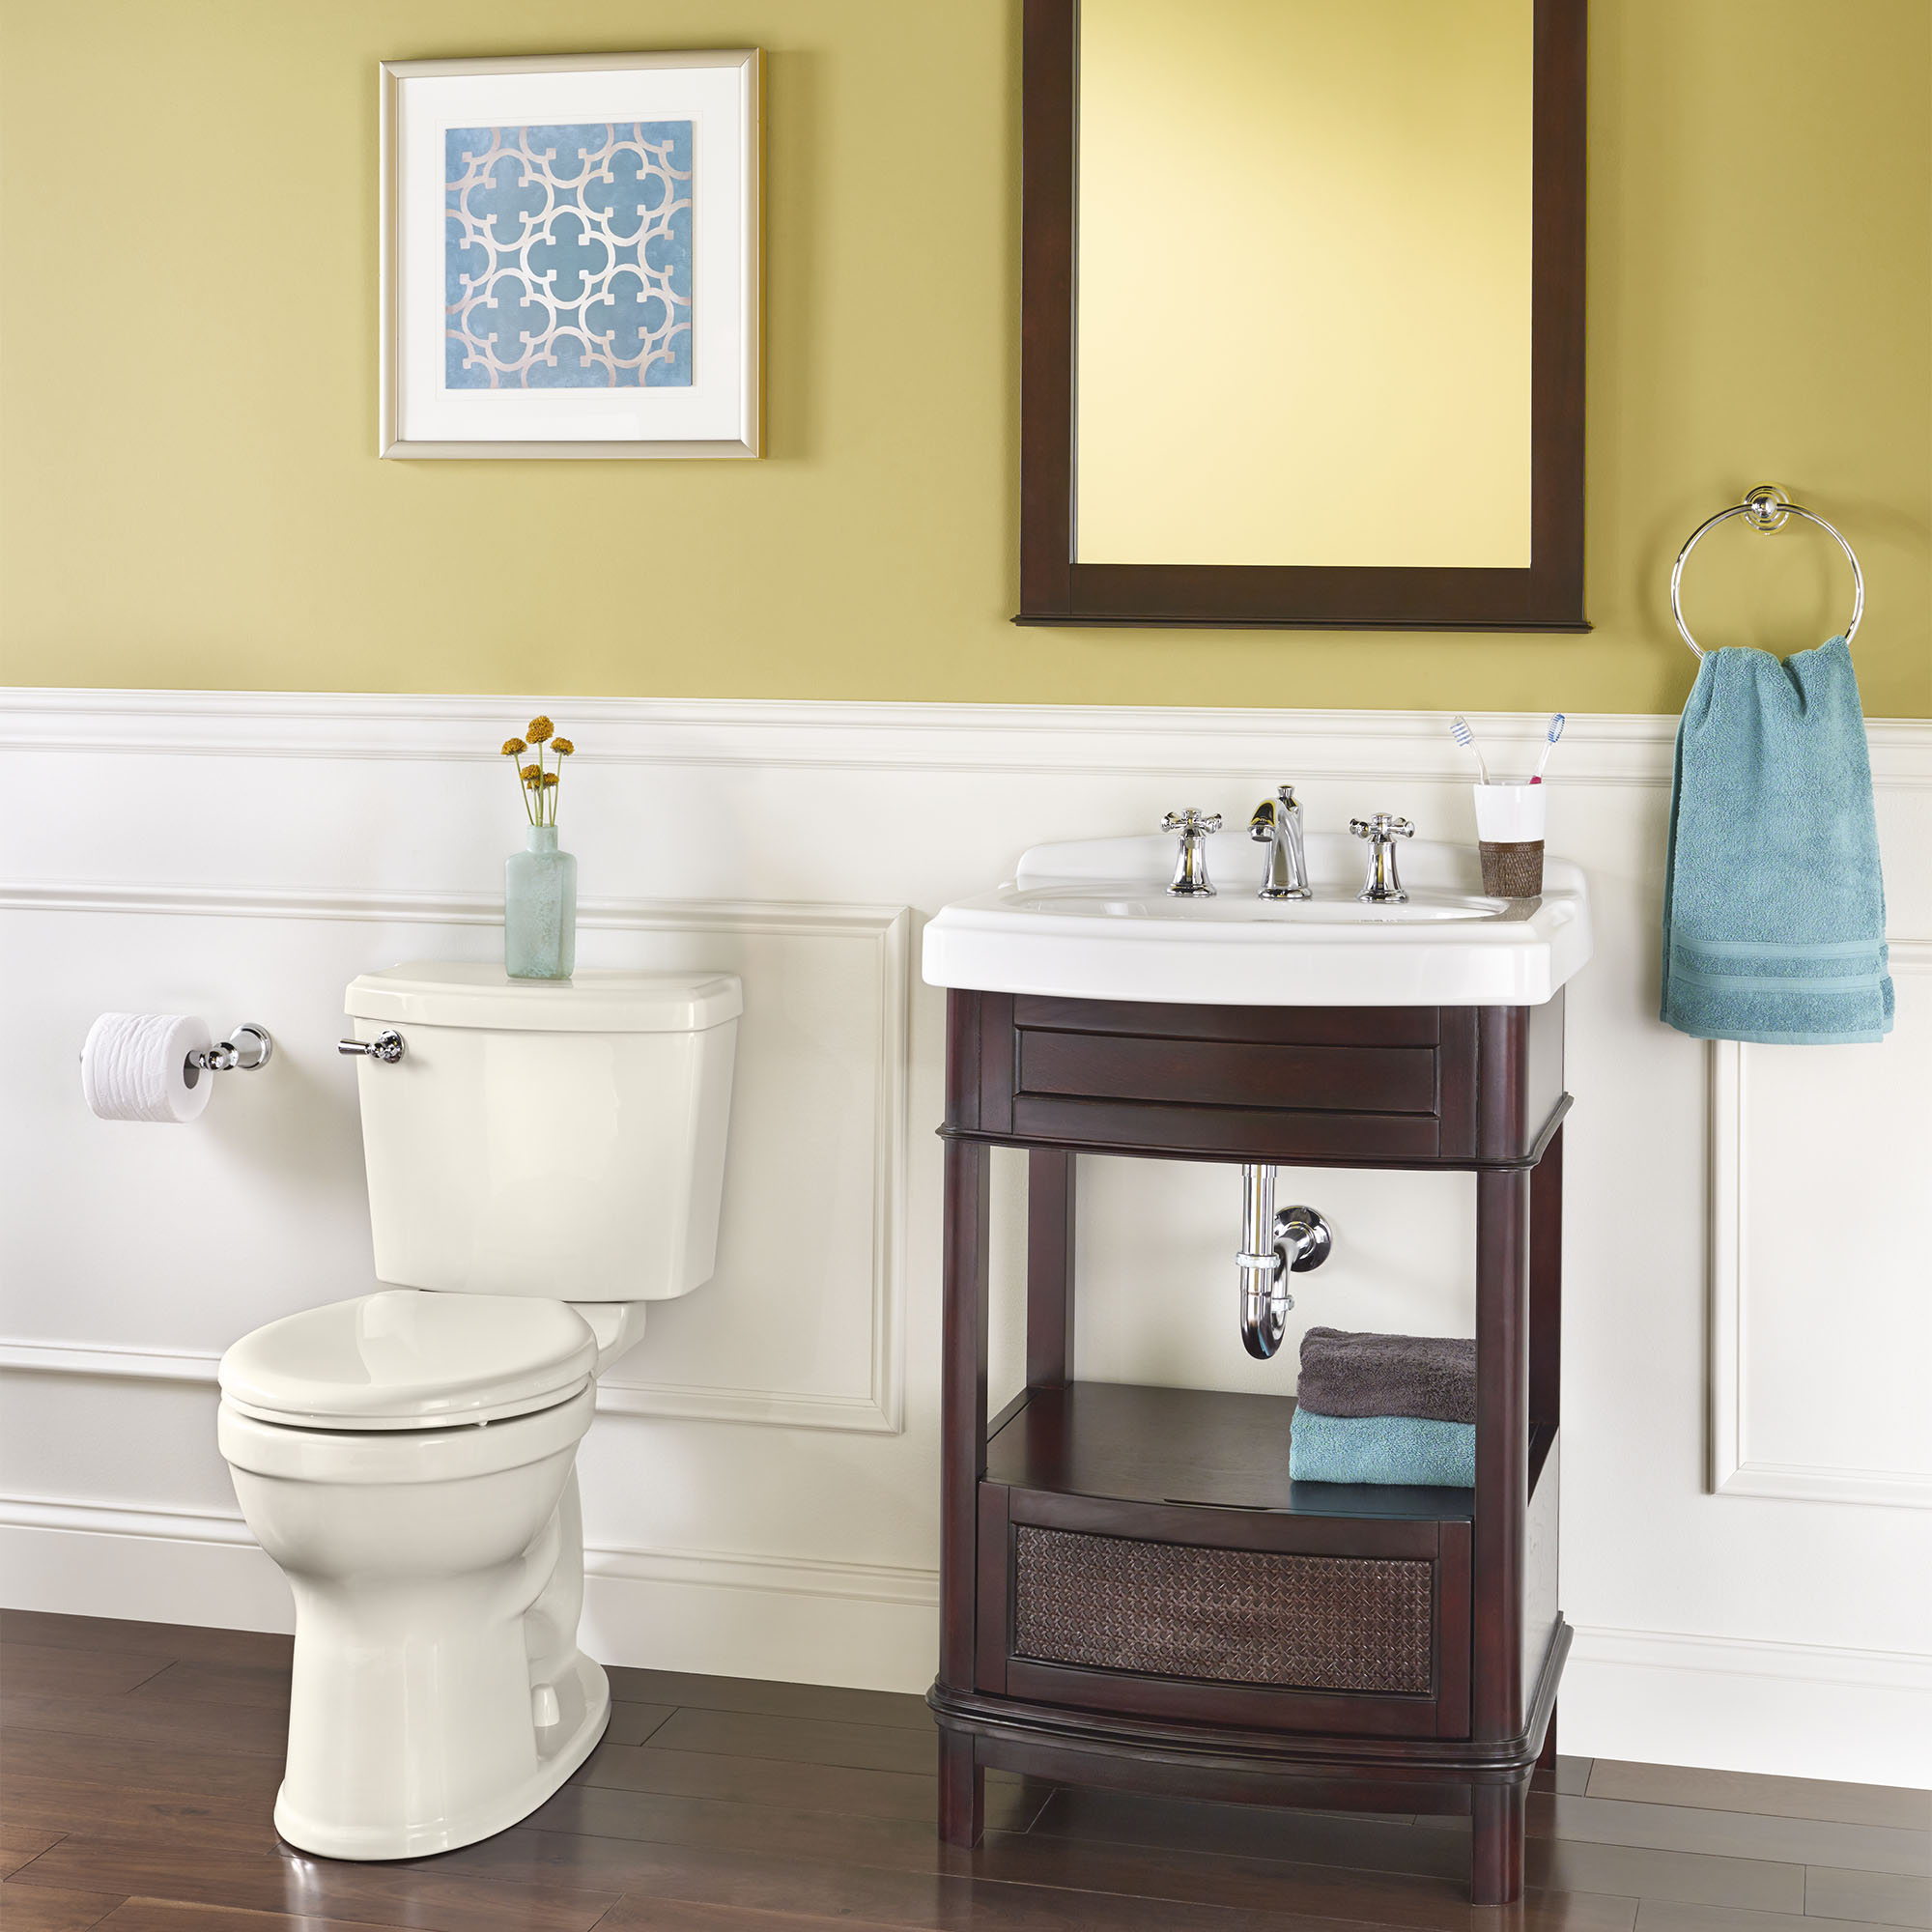 Portsmouth™ Champion™ PRO Two-Piece 1.28 gpf/4.8 Lpf Chair Height Round Front Toilet